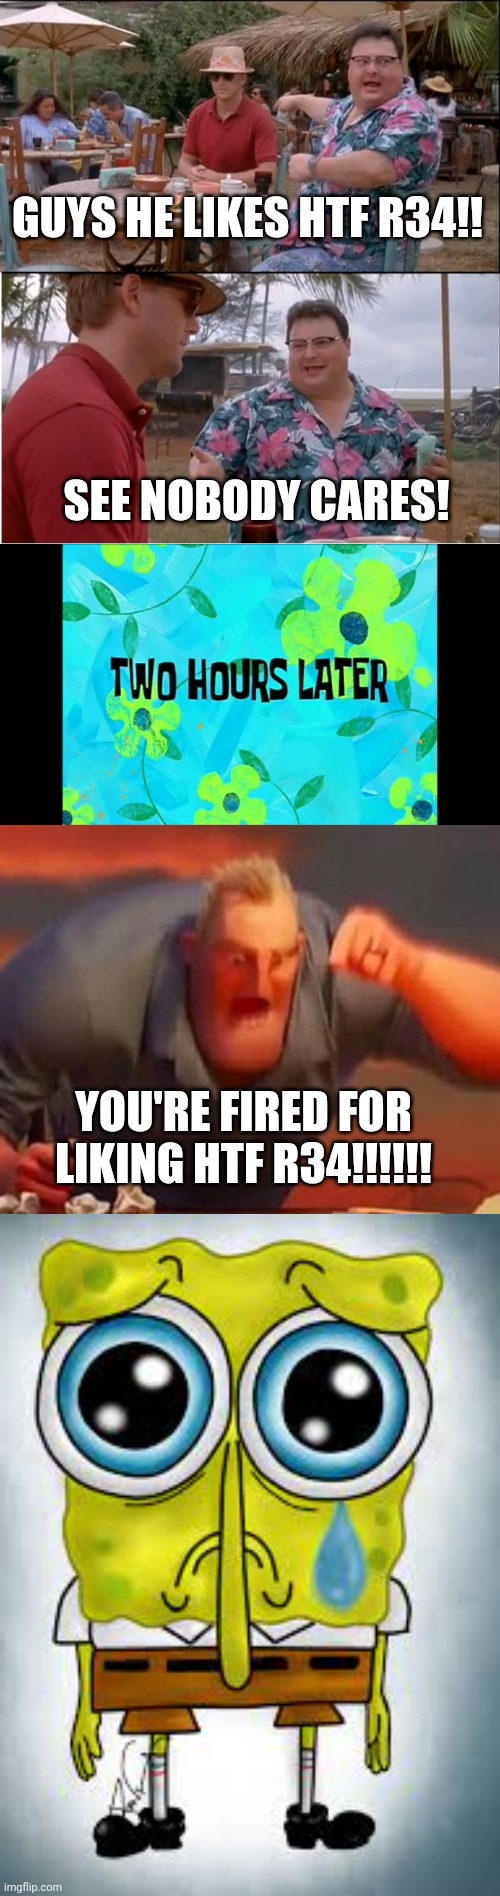 Dont watch htf r34 | GUYS HE LIKES HTF R34!! SEE NOBODY CARES! YOU'RE FIRED FOR LIKING HTF R34!!!!!! | image tagged in memes,see nobody cares,2 hours later,mr incredible mad,spongebob sad | made w/ Imgflip meme maker